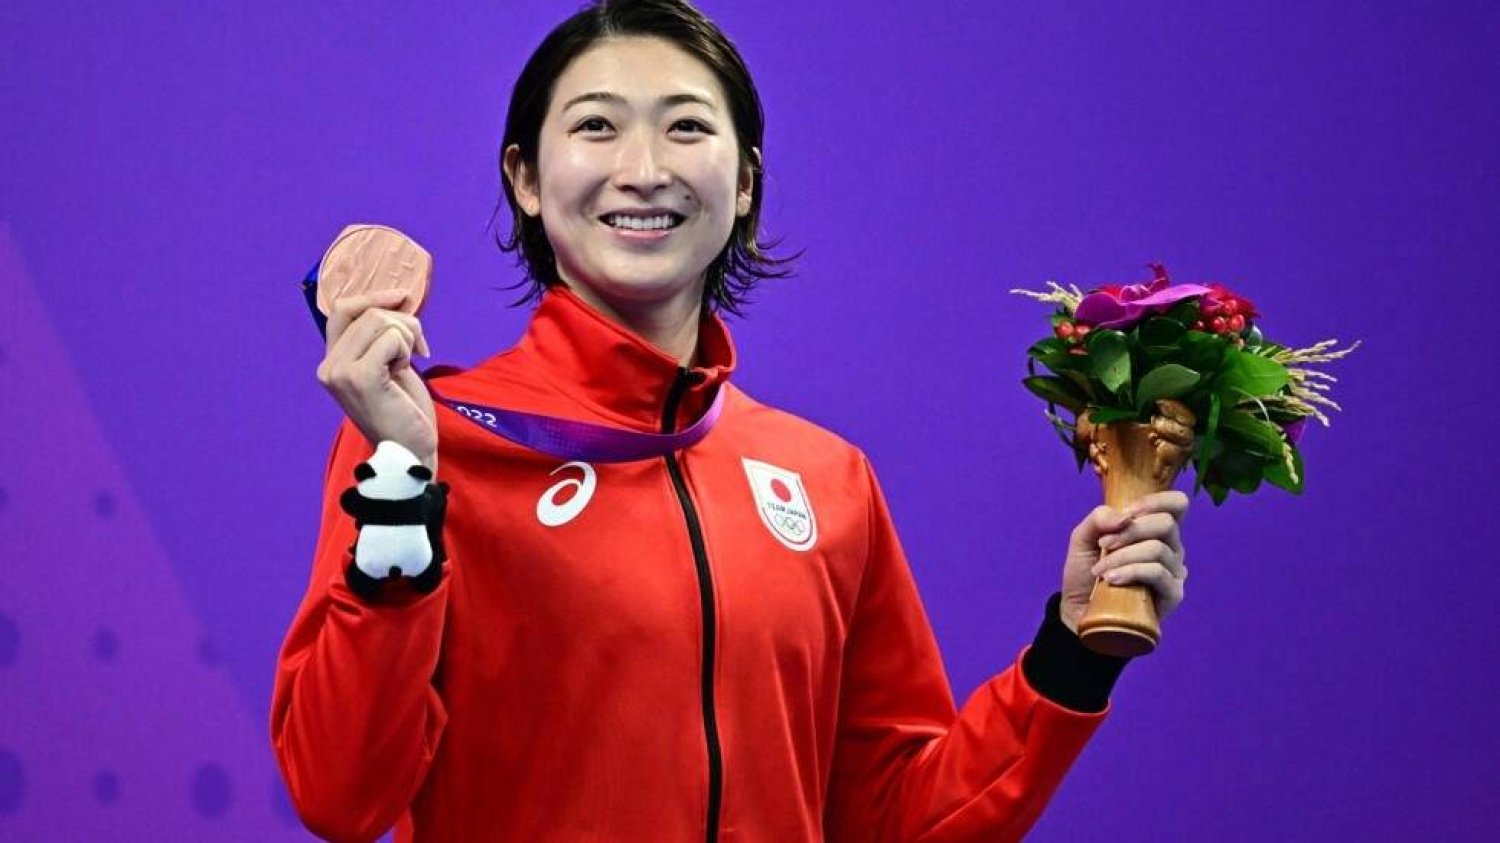 Rikako Ikee celebrates a bronze medal for the women's 50m butterfly at the Asian Games in Hangzhou last year. Manan VATSYAYANA / AFP
